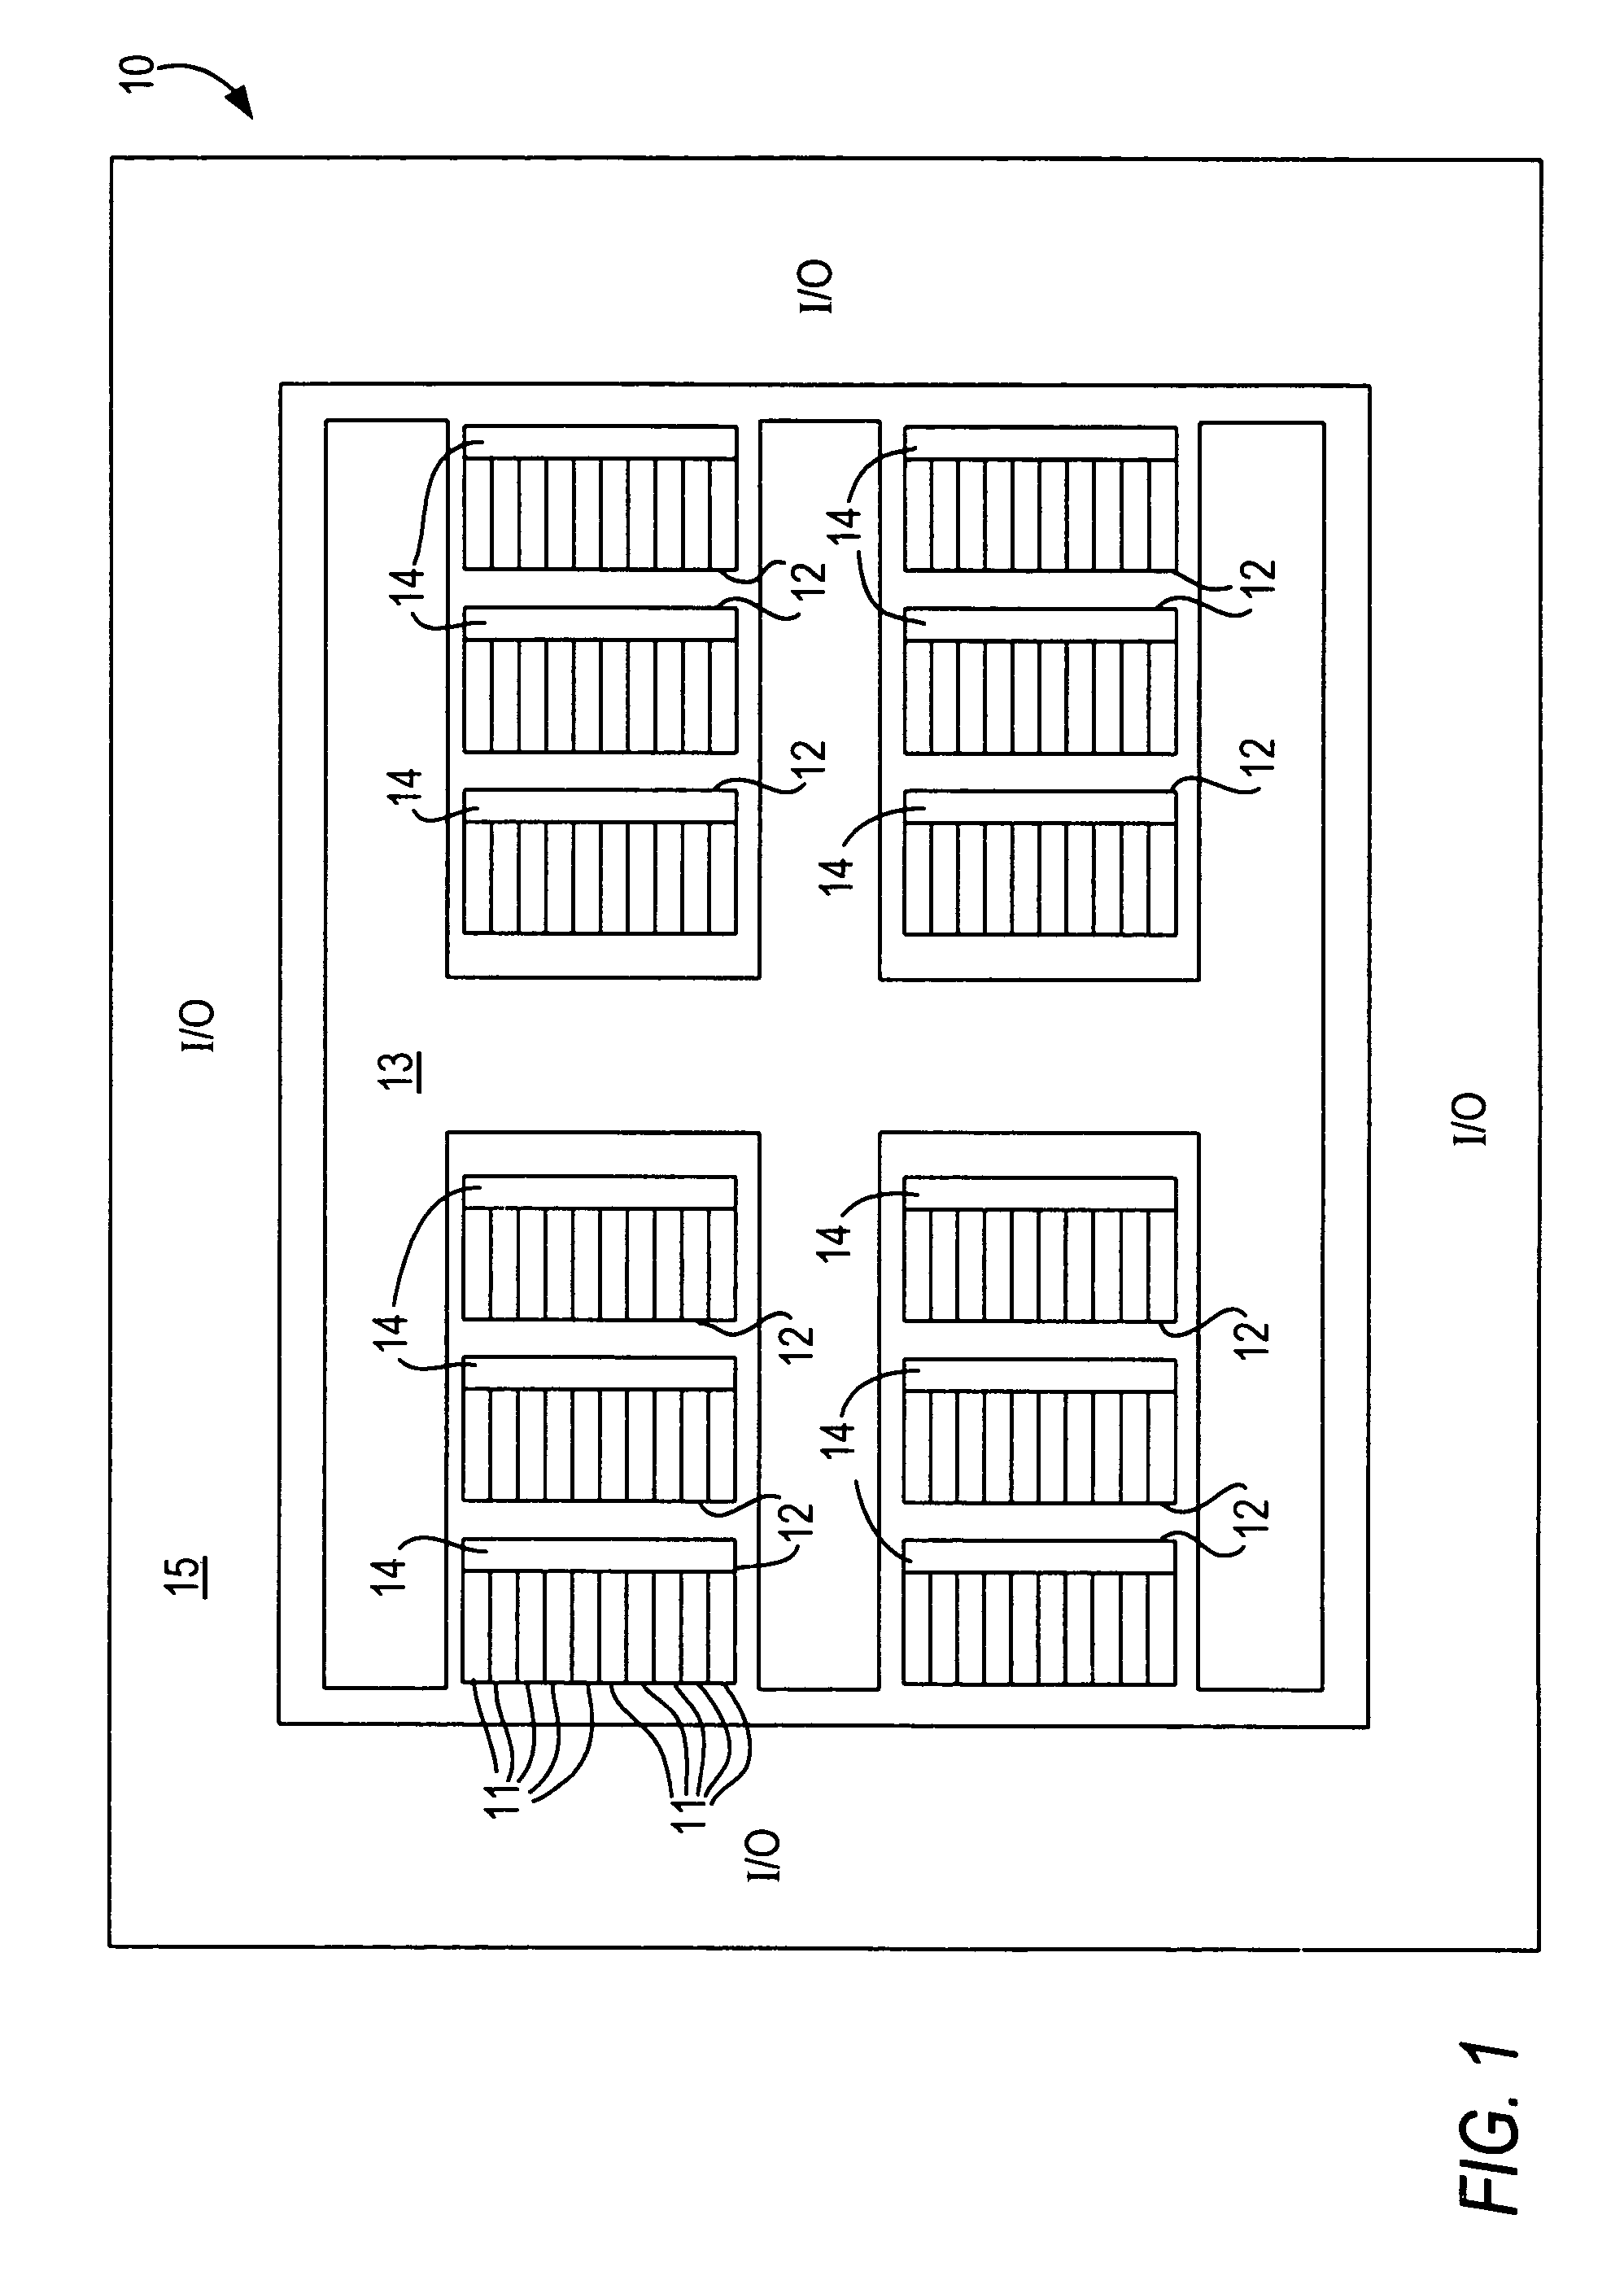 Distributed random access memory in a programmable logic device